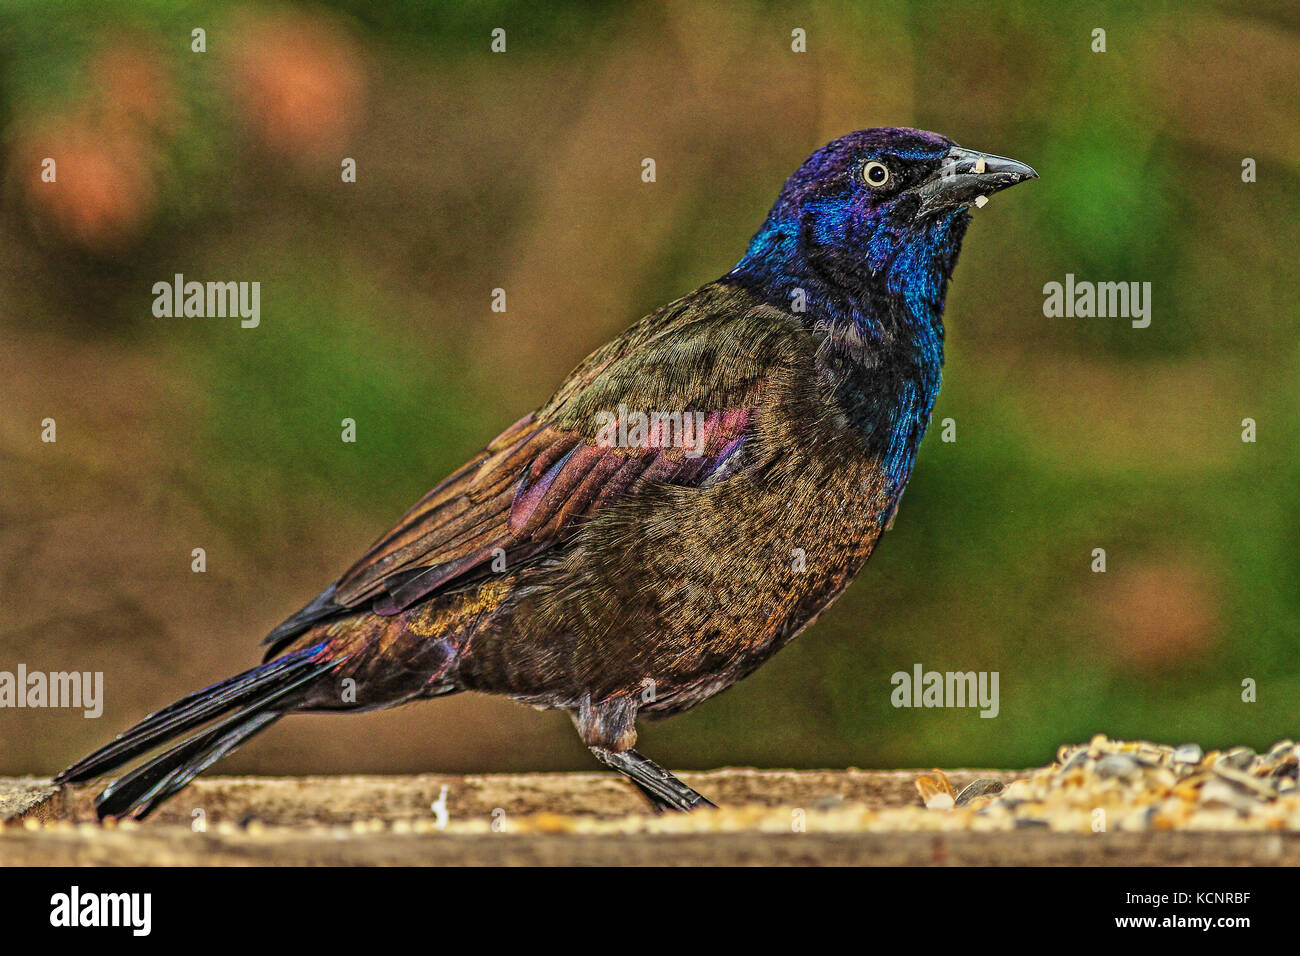 Common Grackle (Quiscalus quiscula) Feeding at feeder tray. Calgary, Alberta, Canada Stock Photo